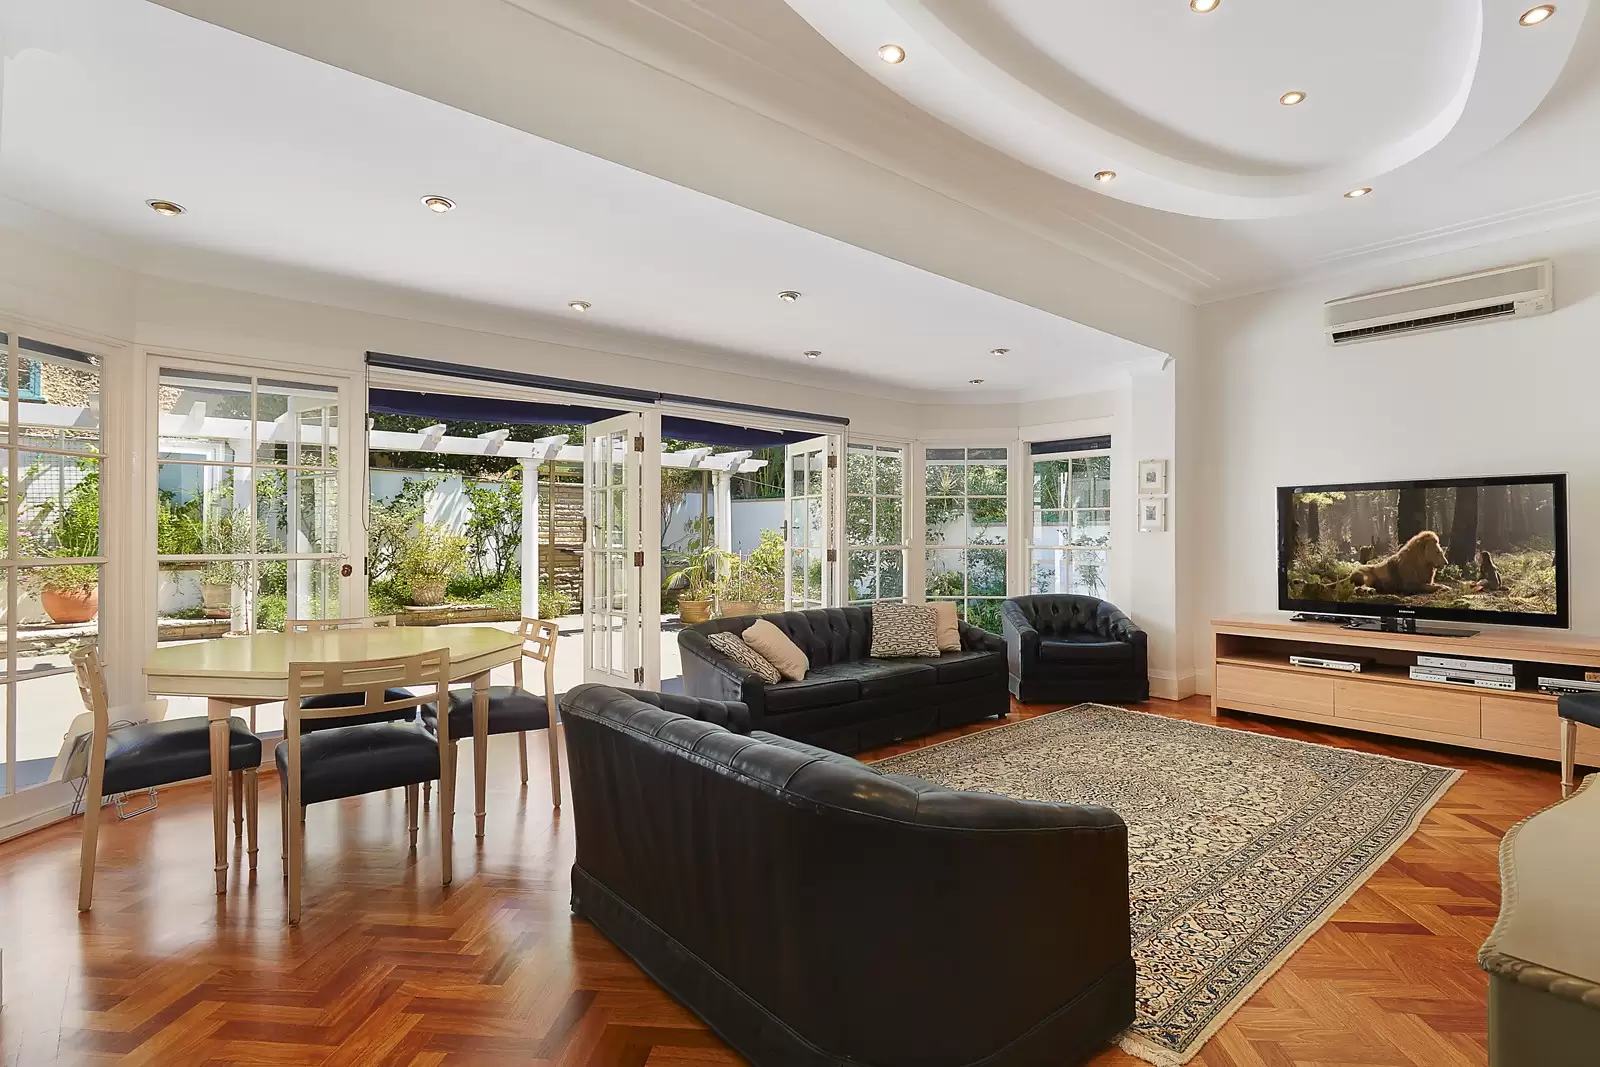 Photo #4: 56 Beresford Road, Rose Bay - Sold by Sydney Sotheby's International Realty